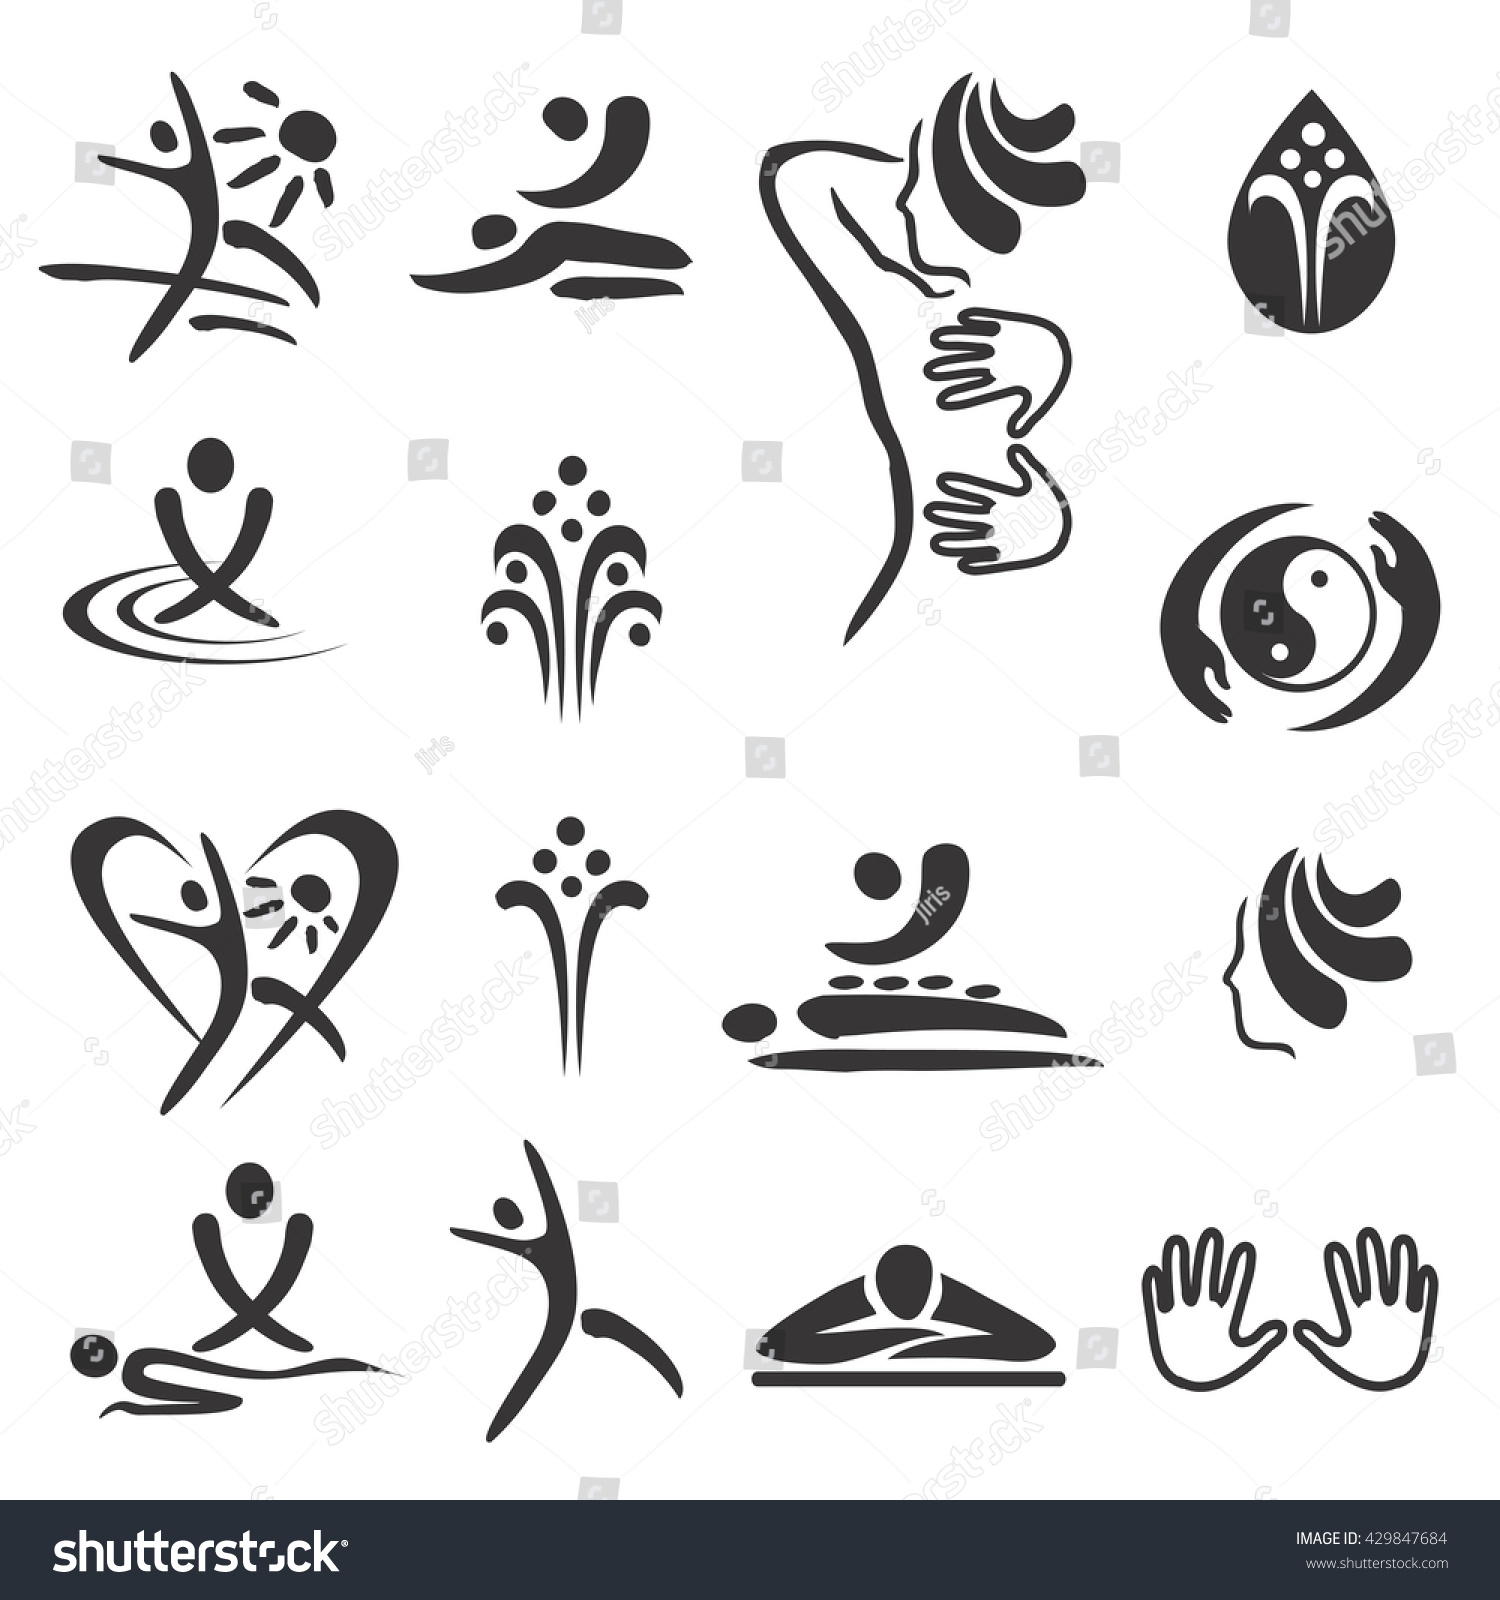 Spa Massage Icons Set Black Icons Stock Vector Royalty Free 429847684 Shutterstock 